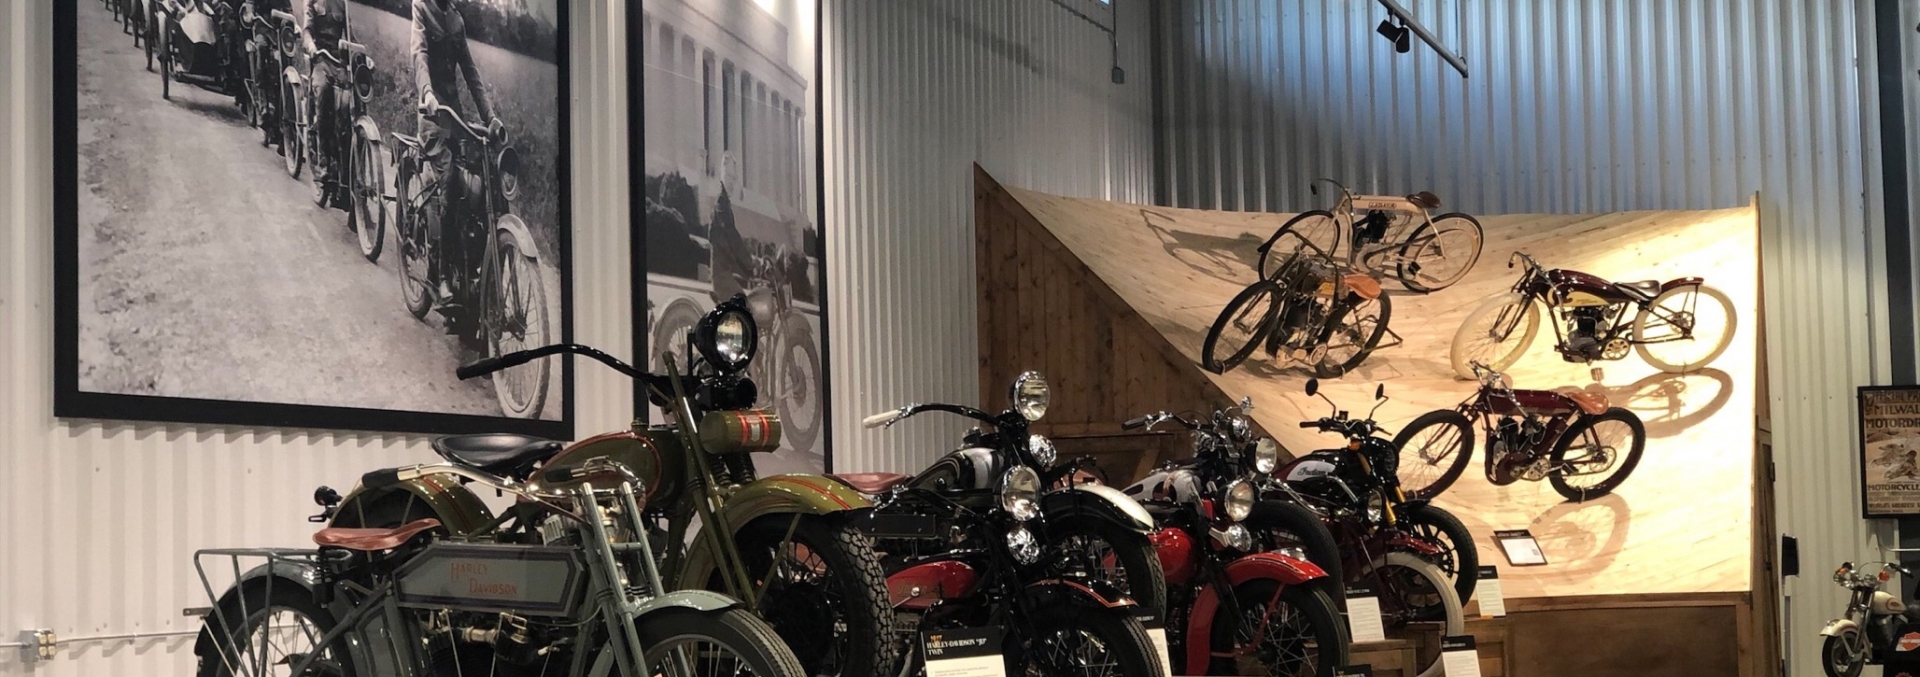 Throttlestop Museum expanded interior of vintage motorcycles and board track